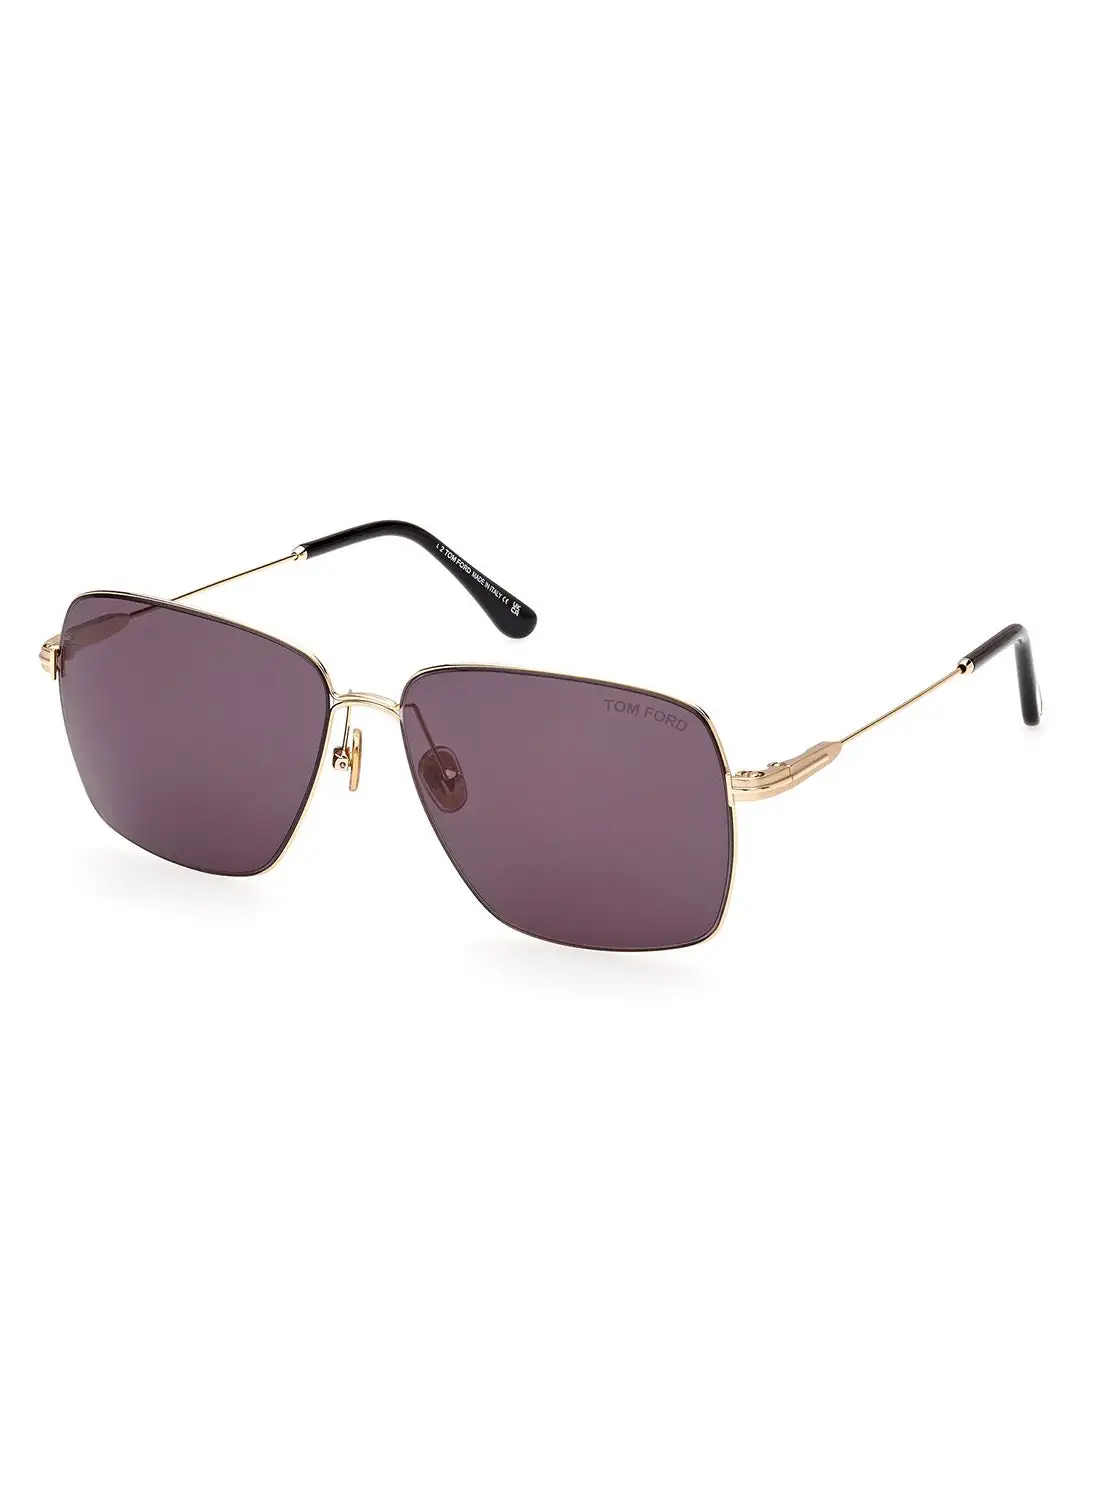 TOM FORD Unisex UV Protection Square Sunglasses - FT099430A58 - Lens Size: 58 Mm